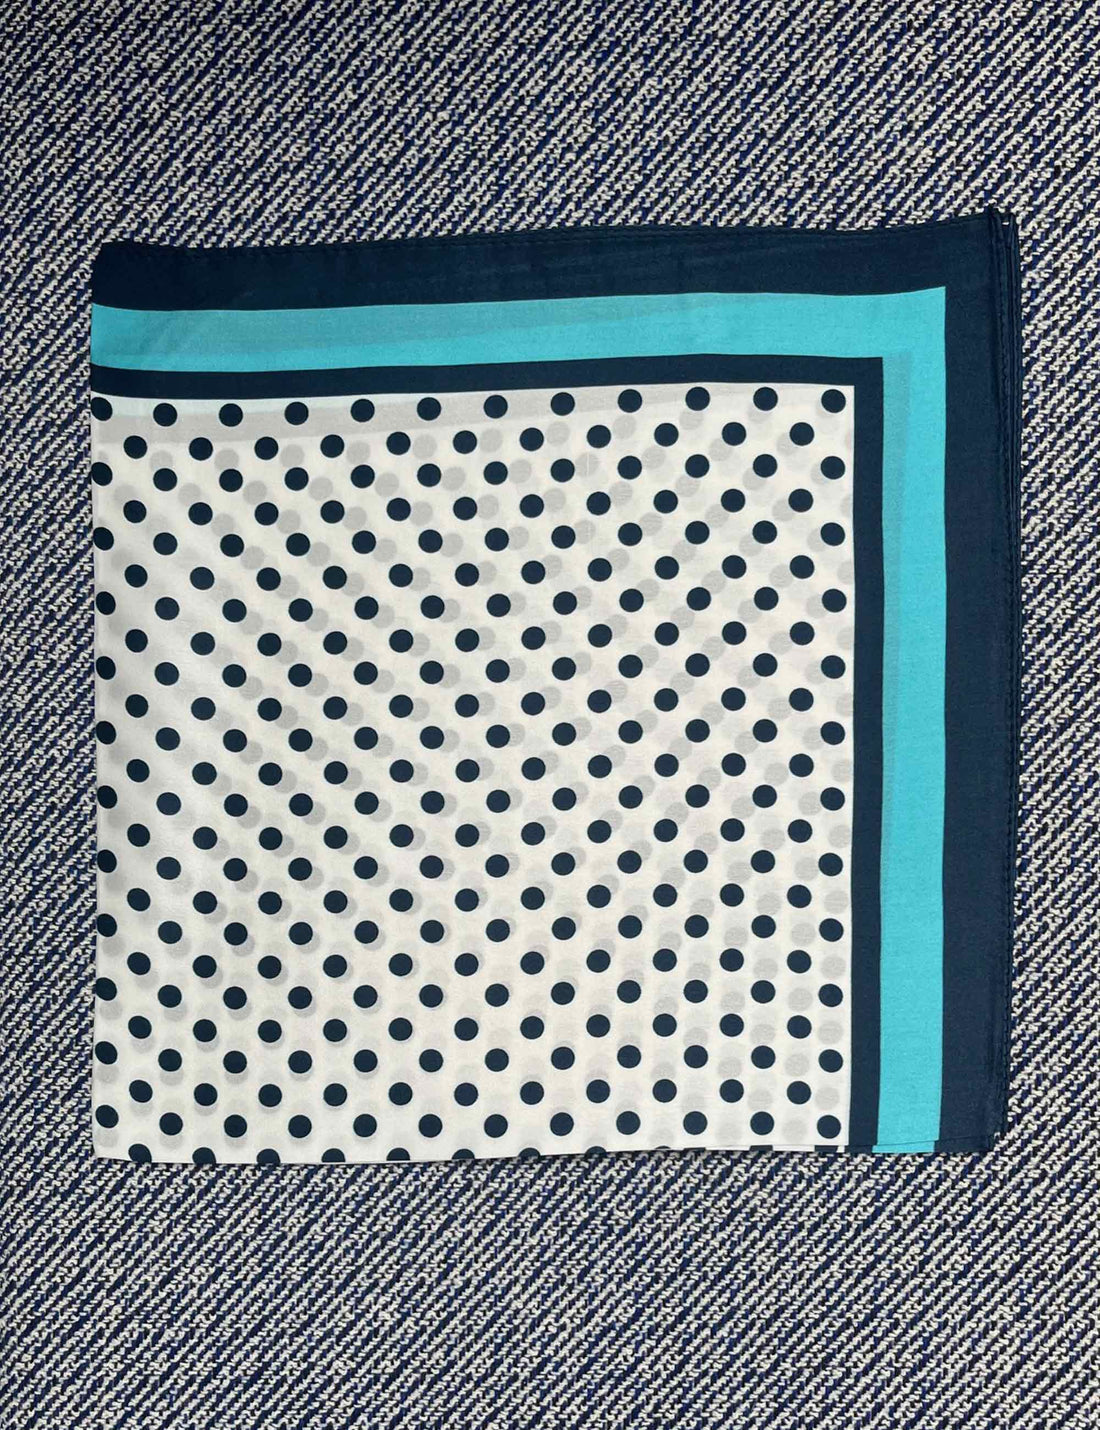 Silk scarf white/navy dots/turquoise